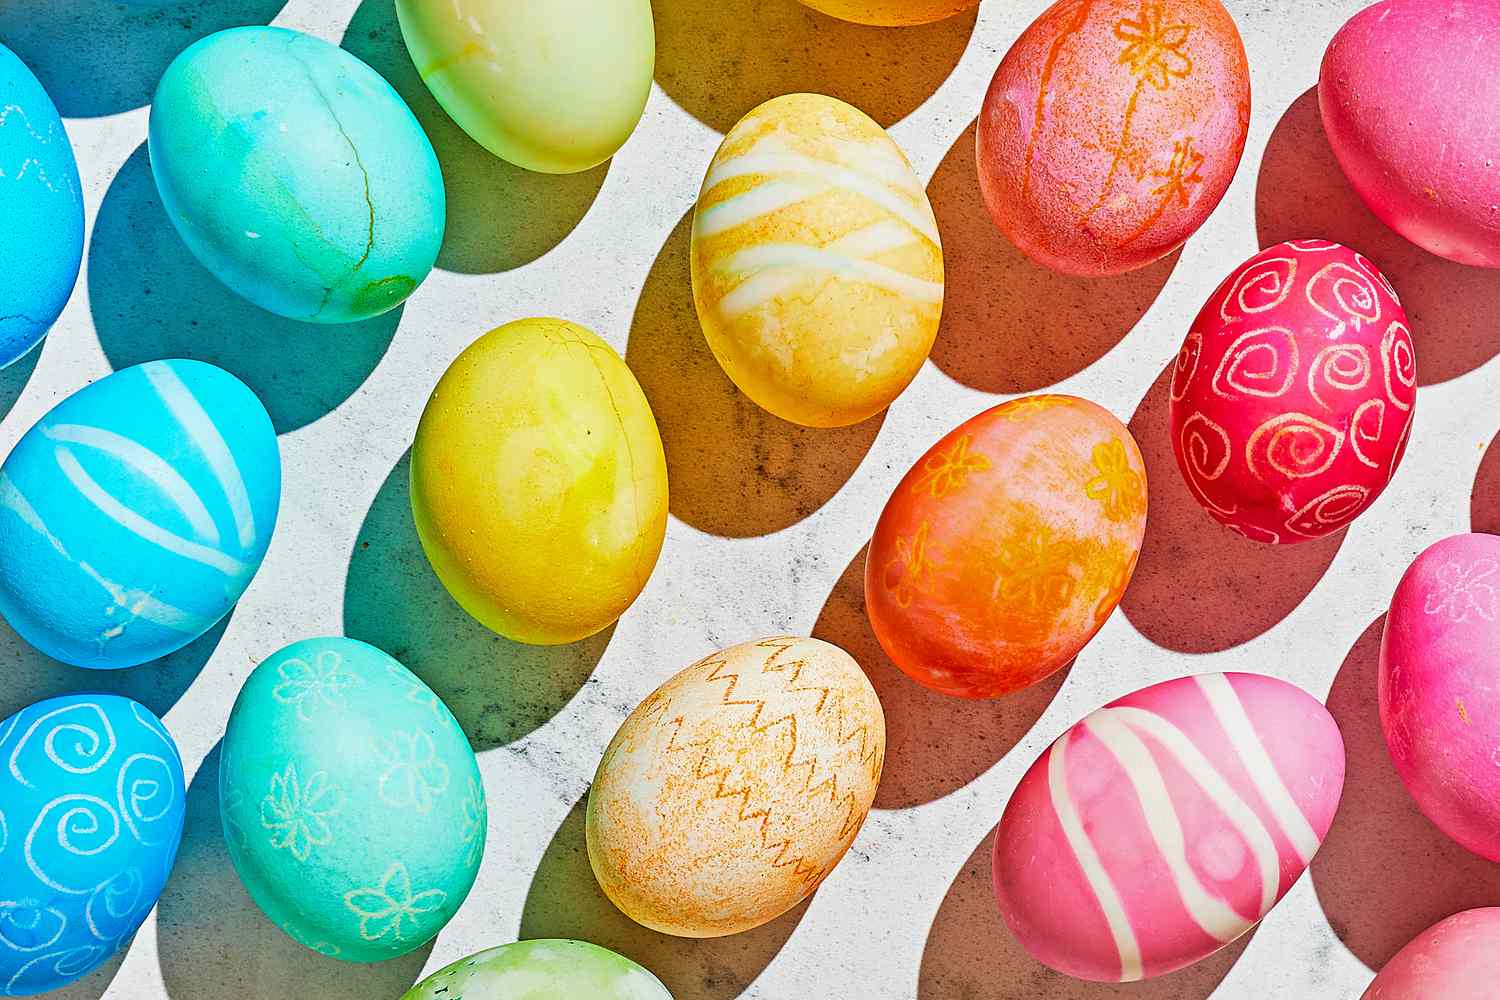 Dyed Easter eggs in a variety of rainbow colors